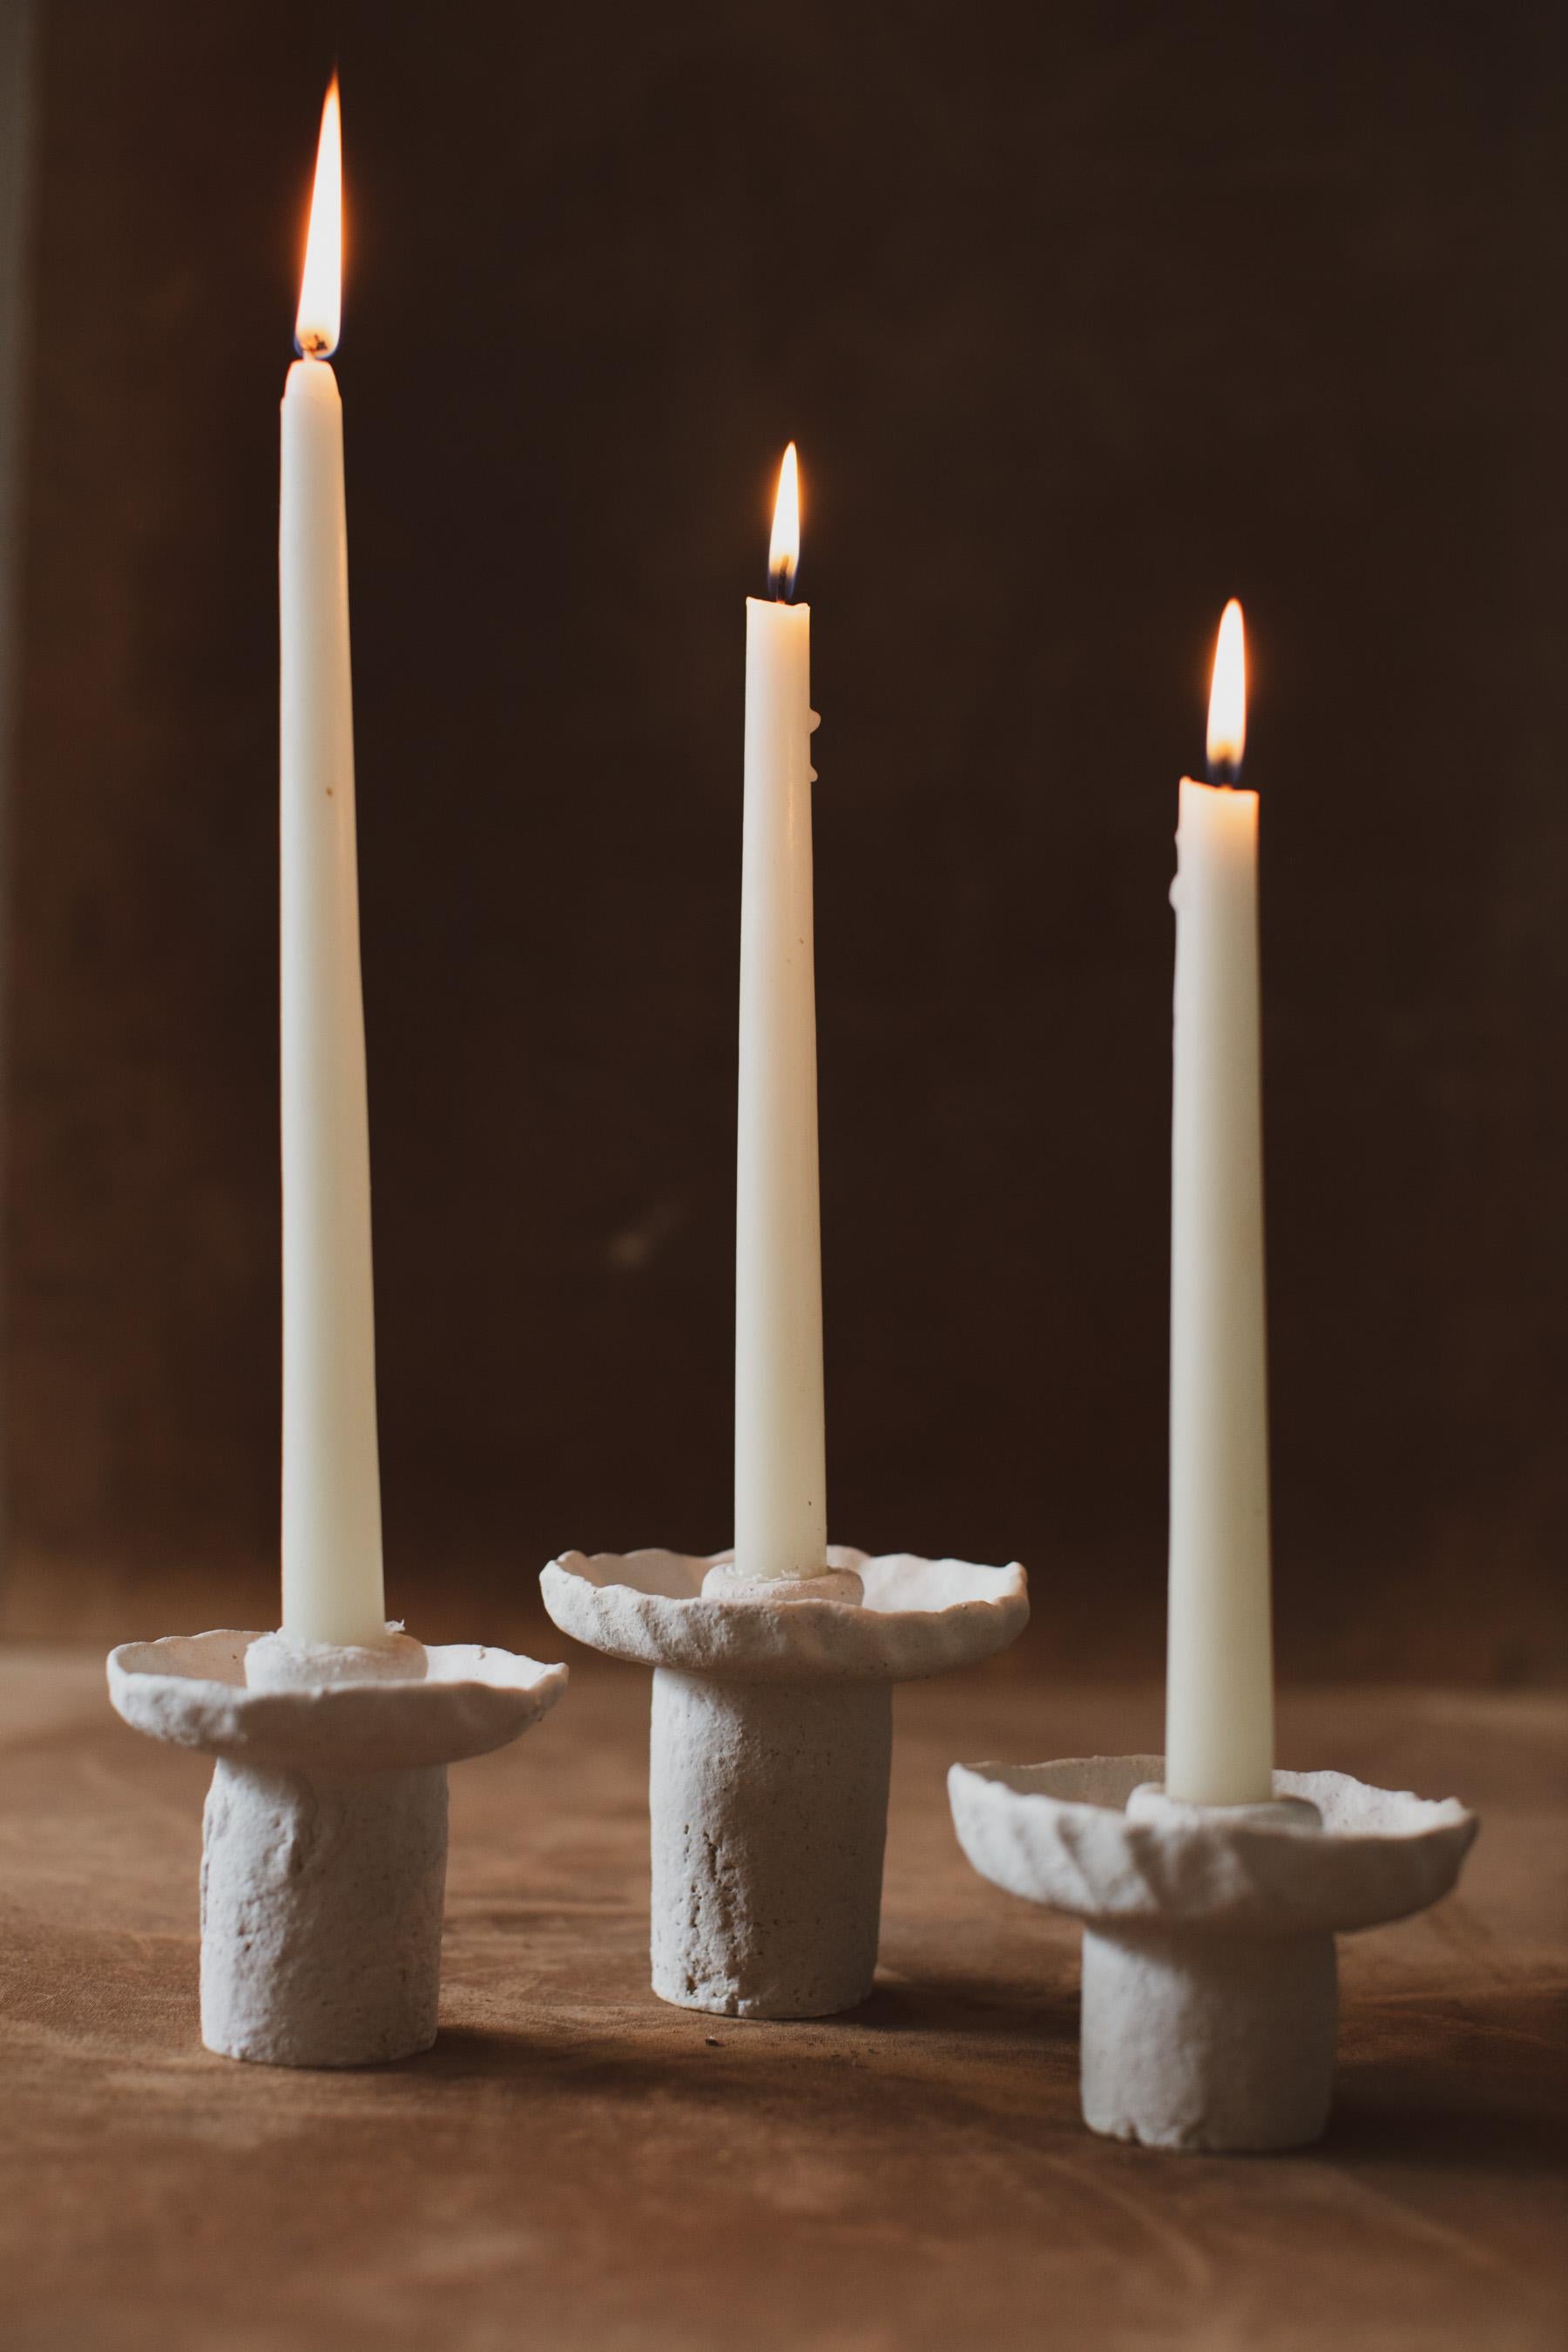 This ceramic candle holders are designed and hand-crafted in Brooklyn, NY by Ilona Golovina of Mugly.NYC, she uses a coil building technique to create these one of a kind pieces. Each piece is unique, sizes vary.
About the creator: Ilona Golovina